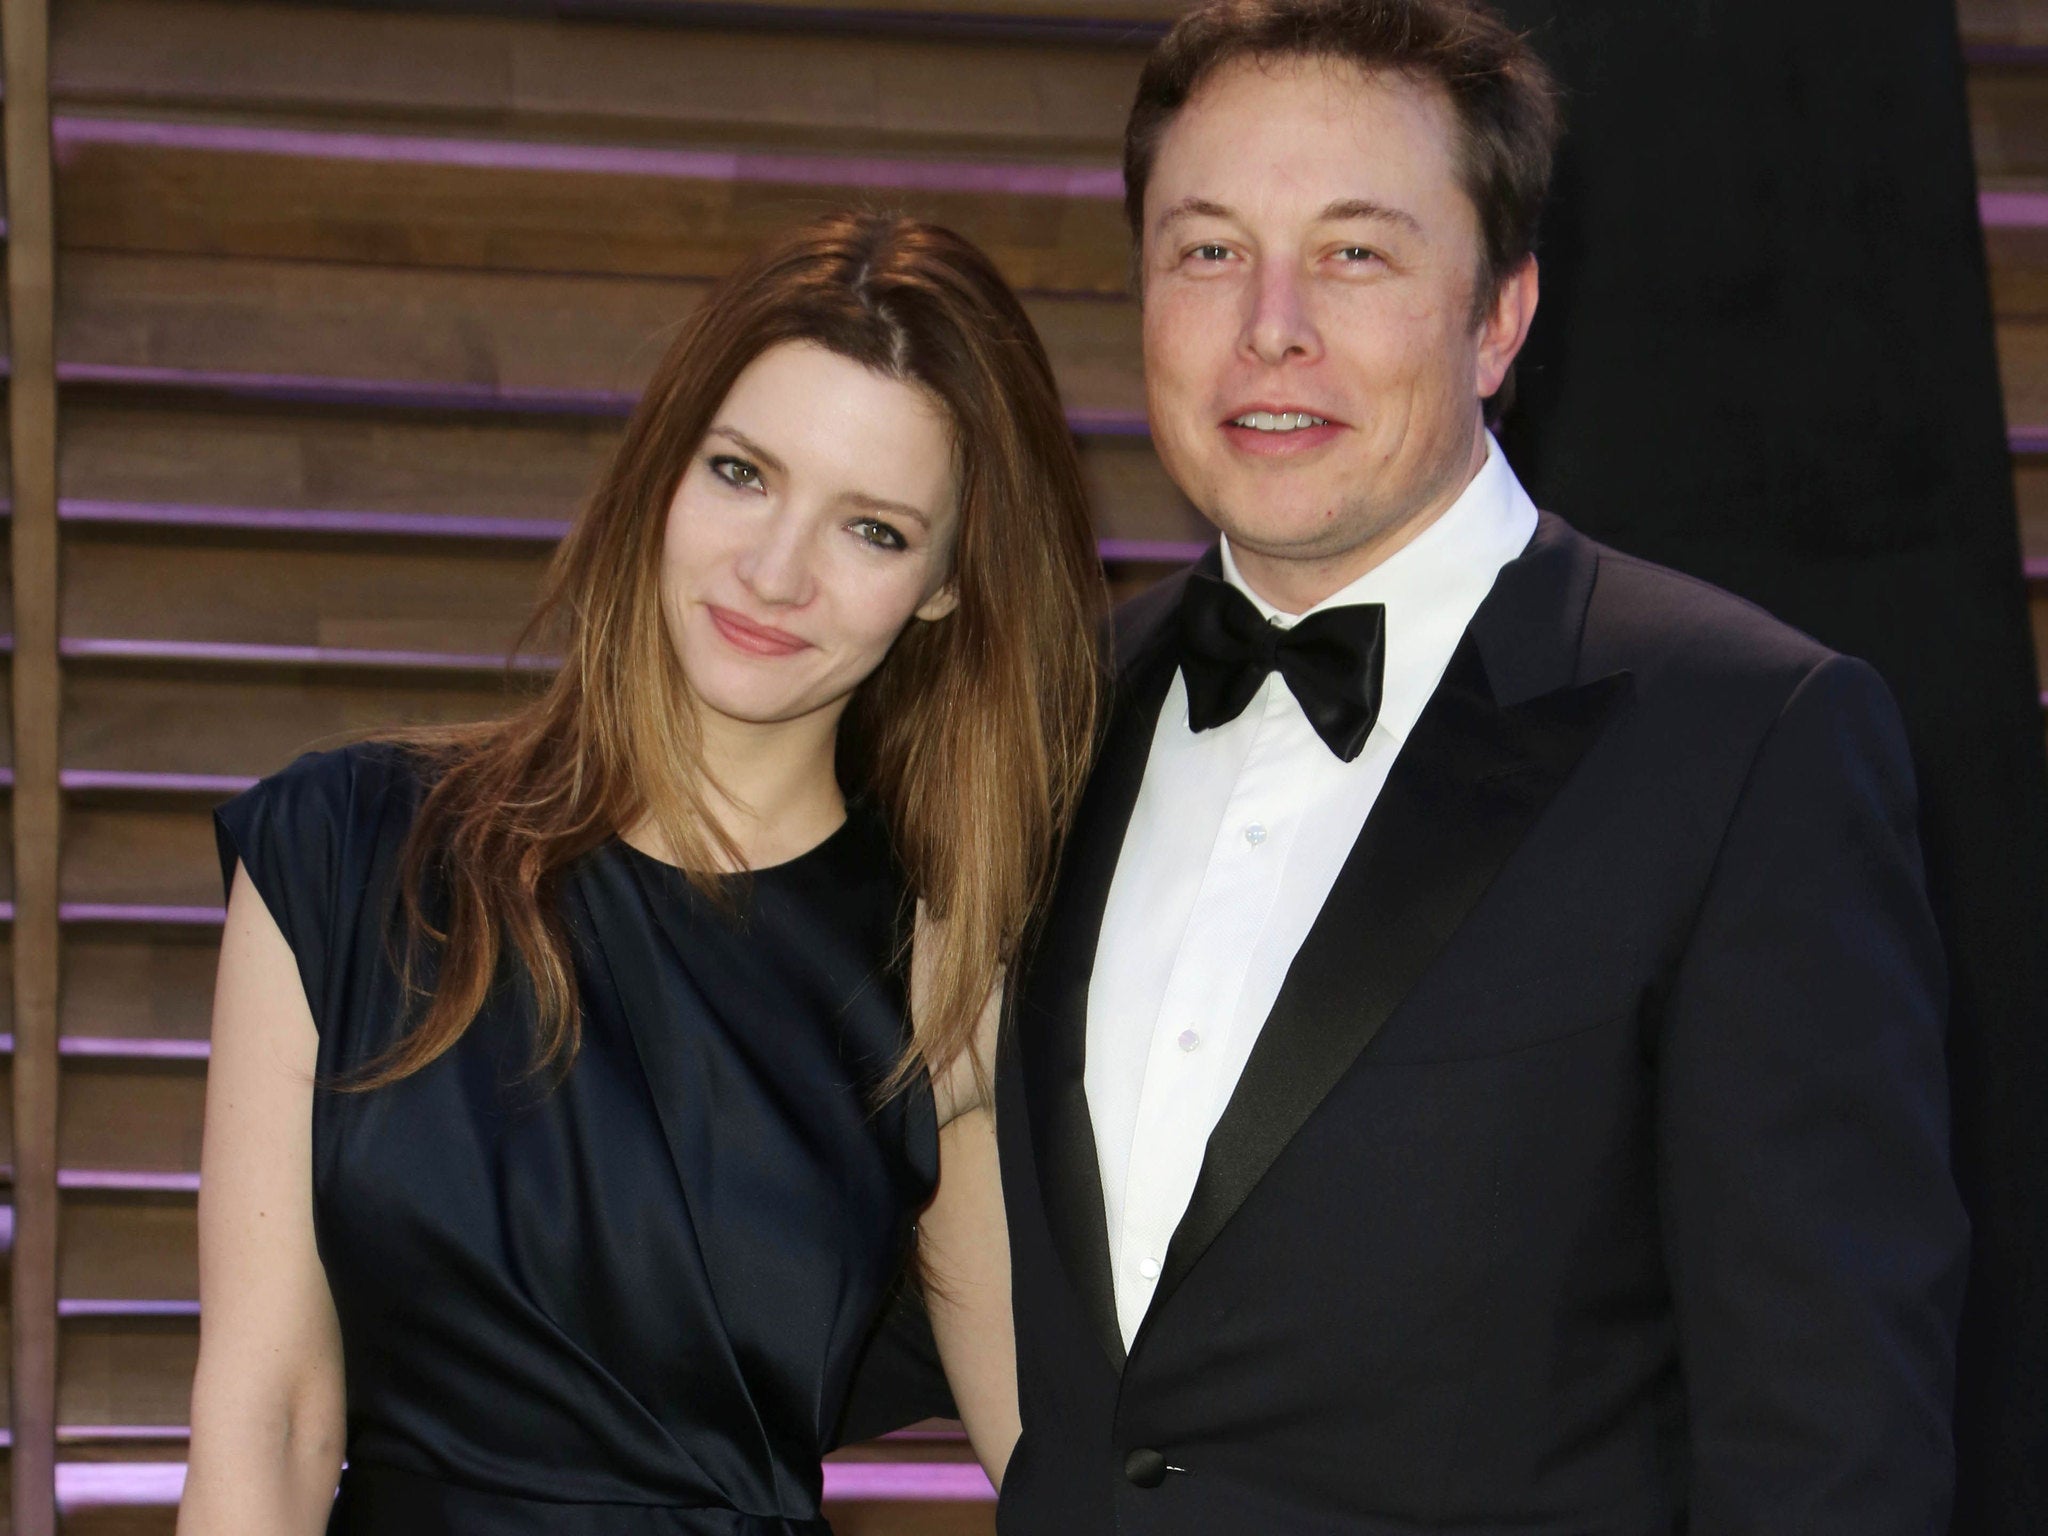 Billionaire Elon Musk and actress Talulah Riley divorce for second time ...